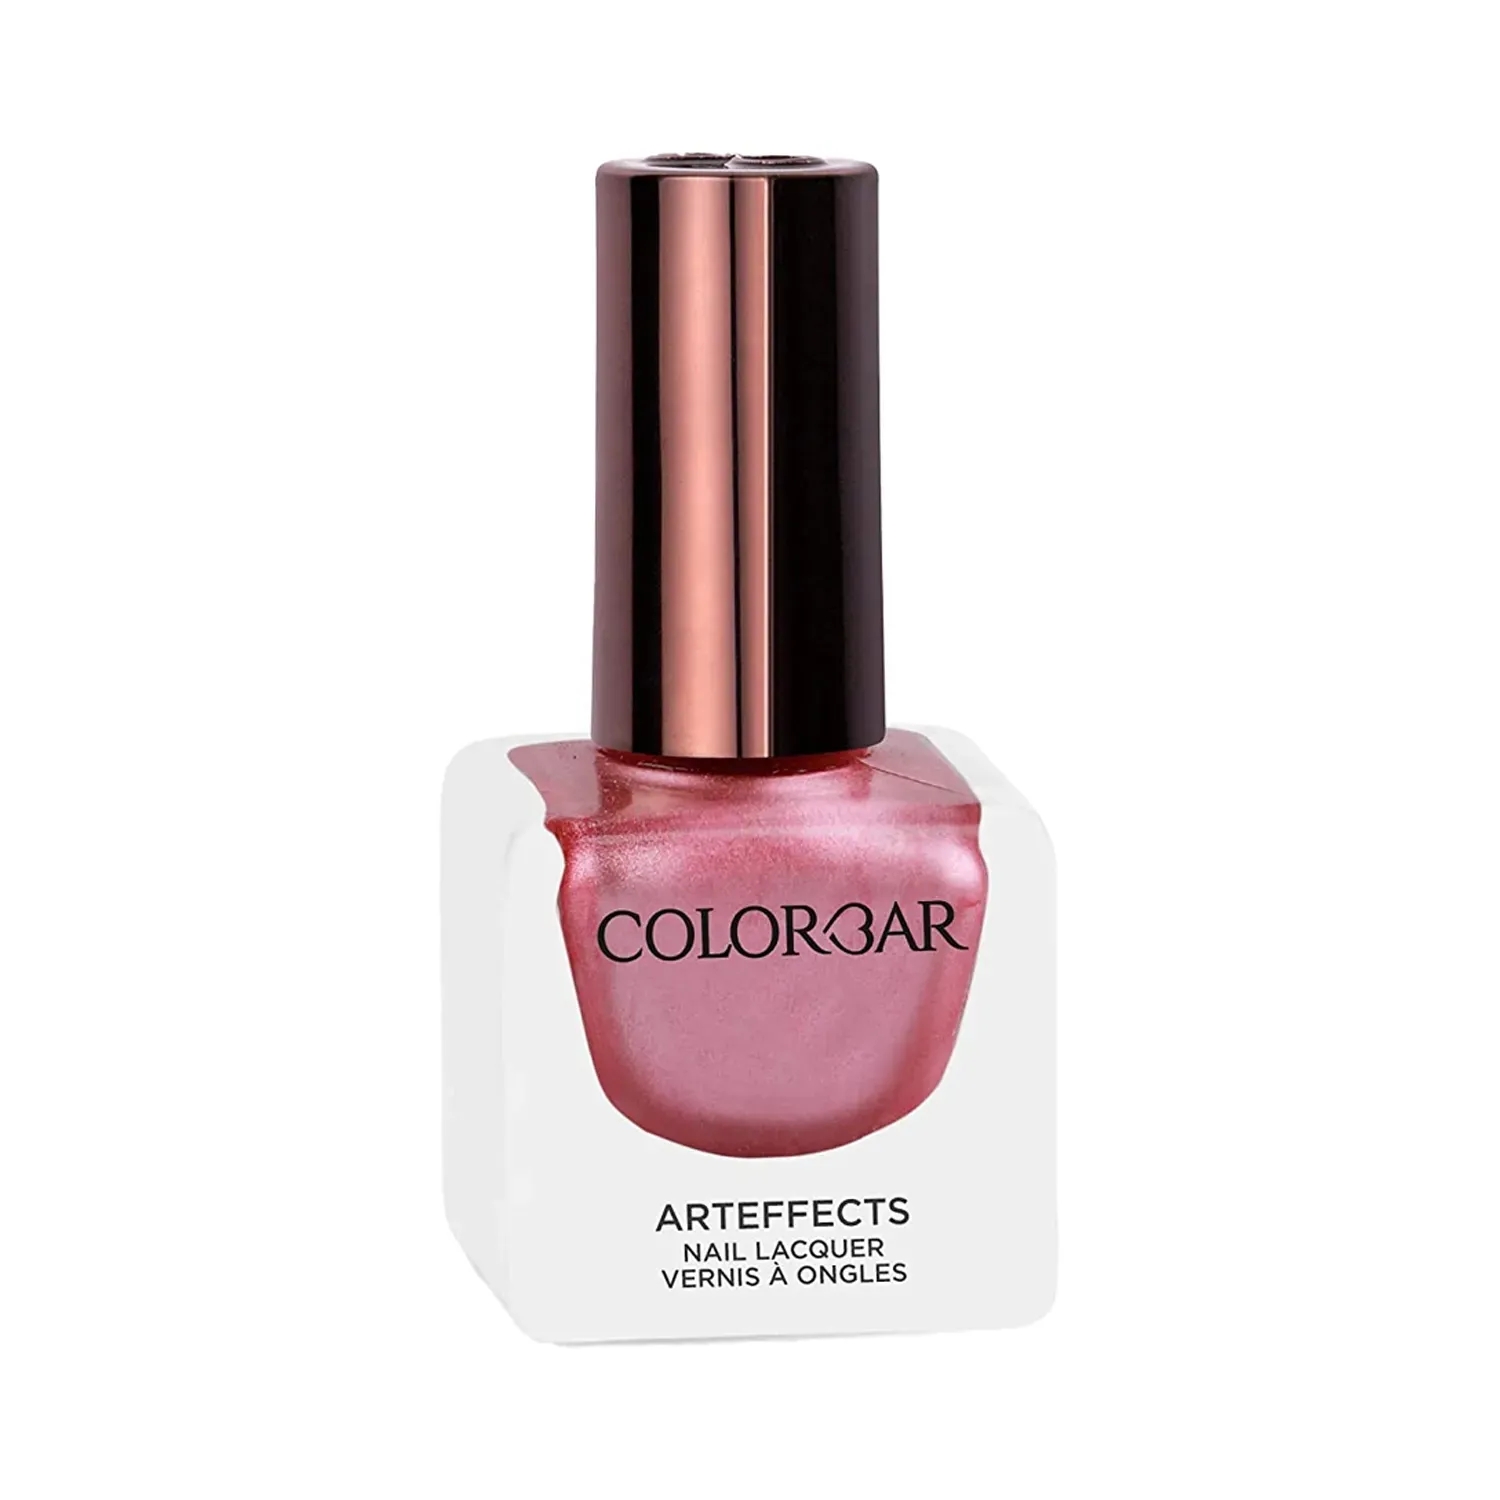 COLORBAR Luxe Artefefects nail polish love struck 048 love struck - Price  in India, Buy COLORBAR Luxe Artefefects nail polish love struck 048 love  struck Online In India, Reviews, Ratings & Features | Flipkart.com